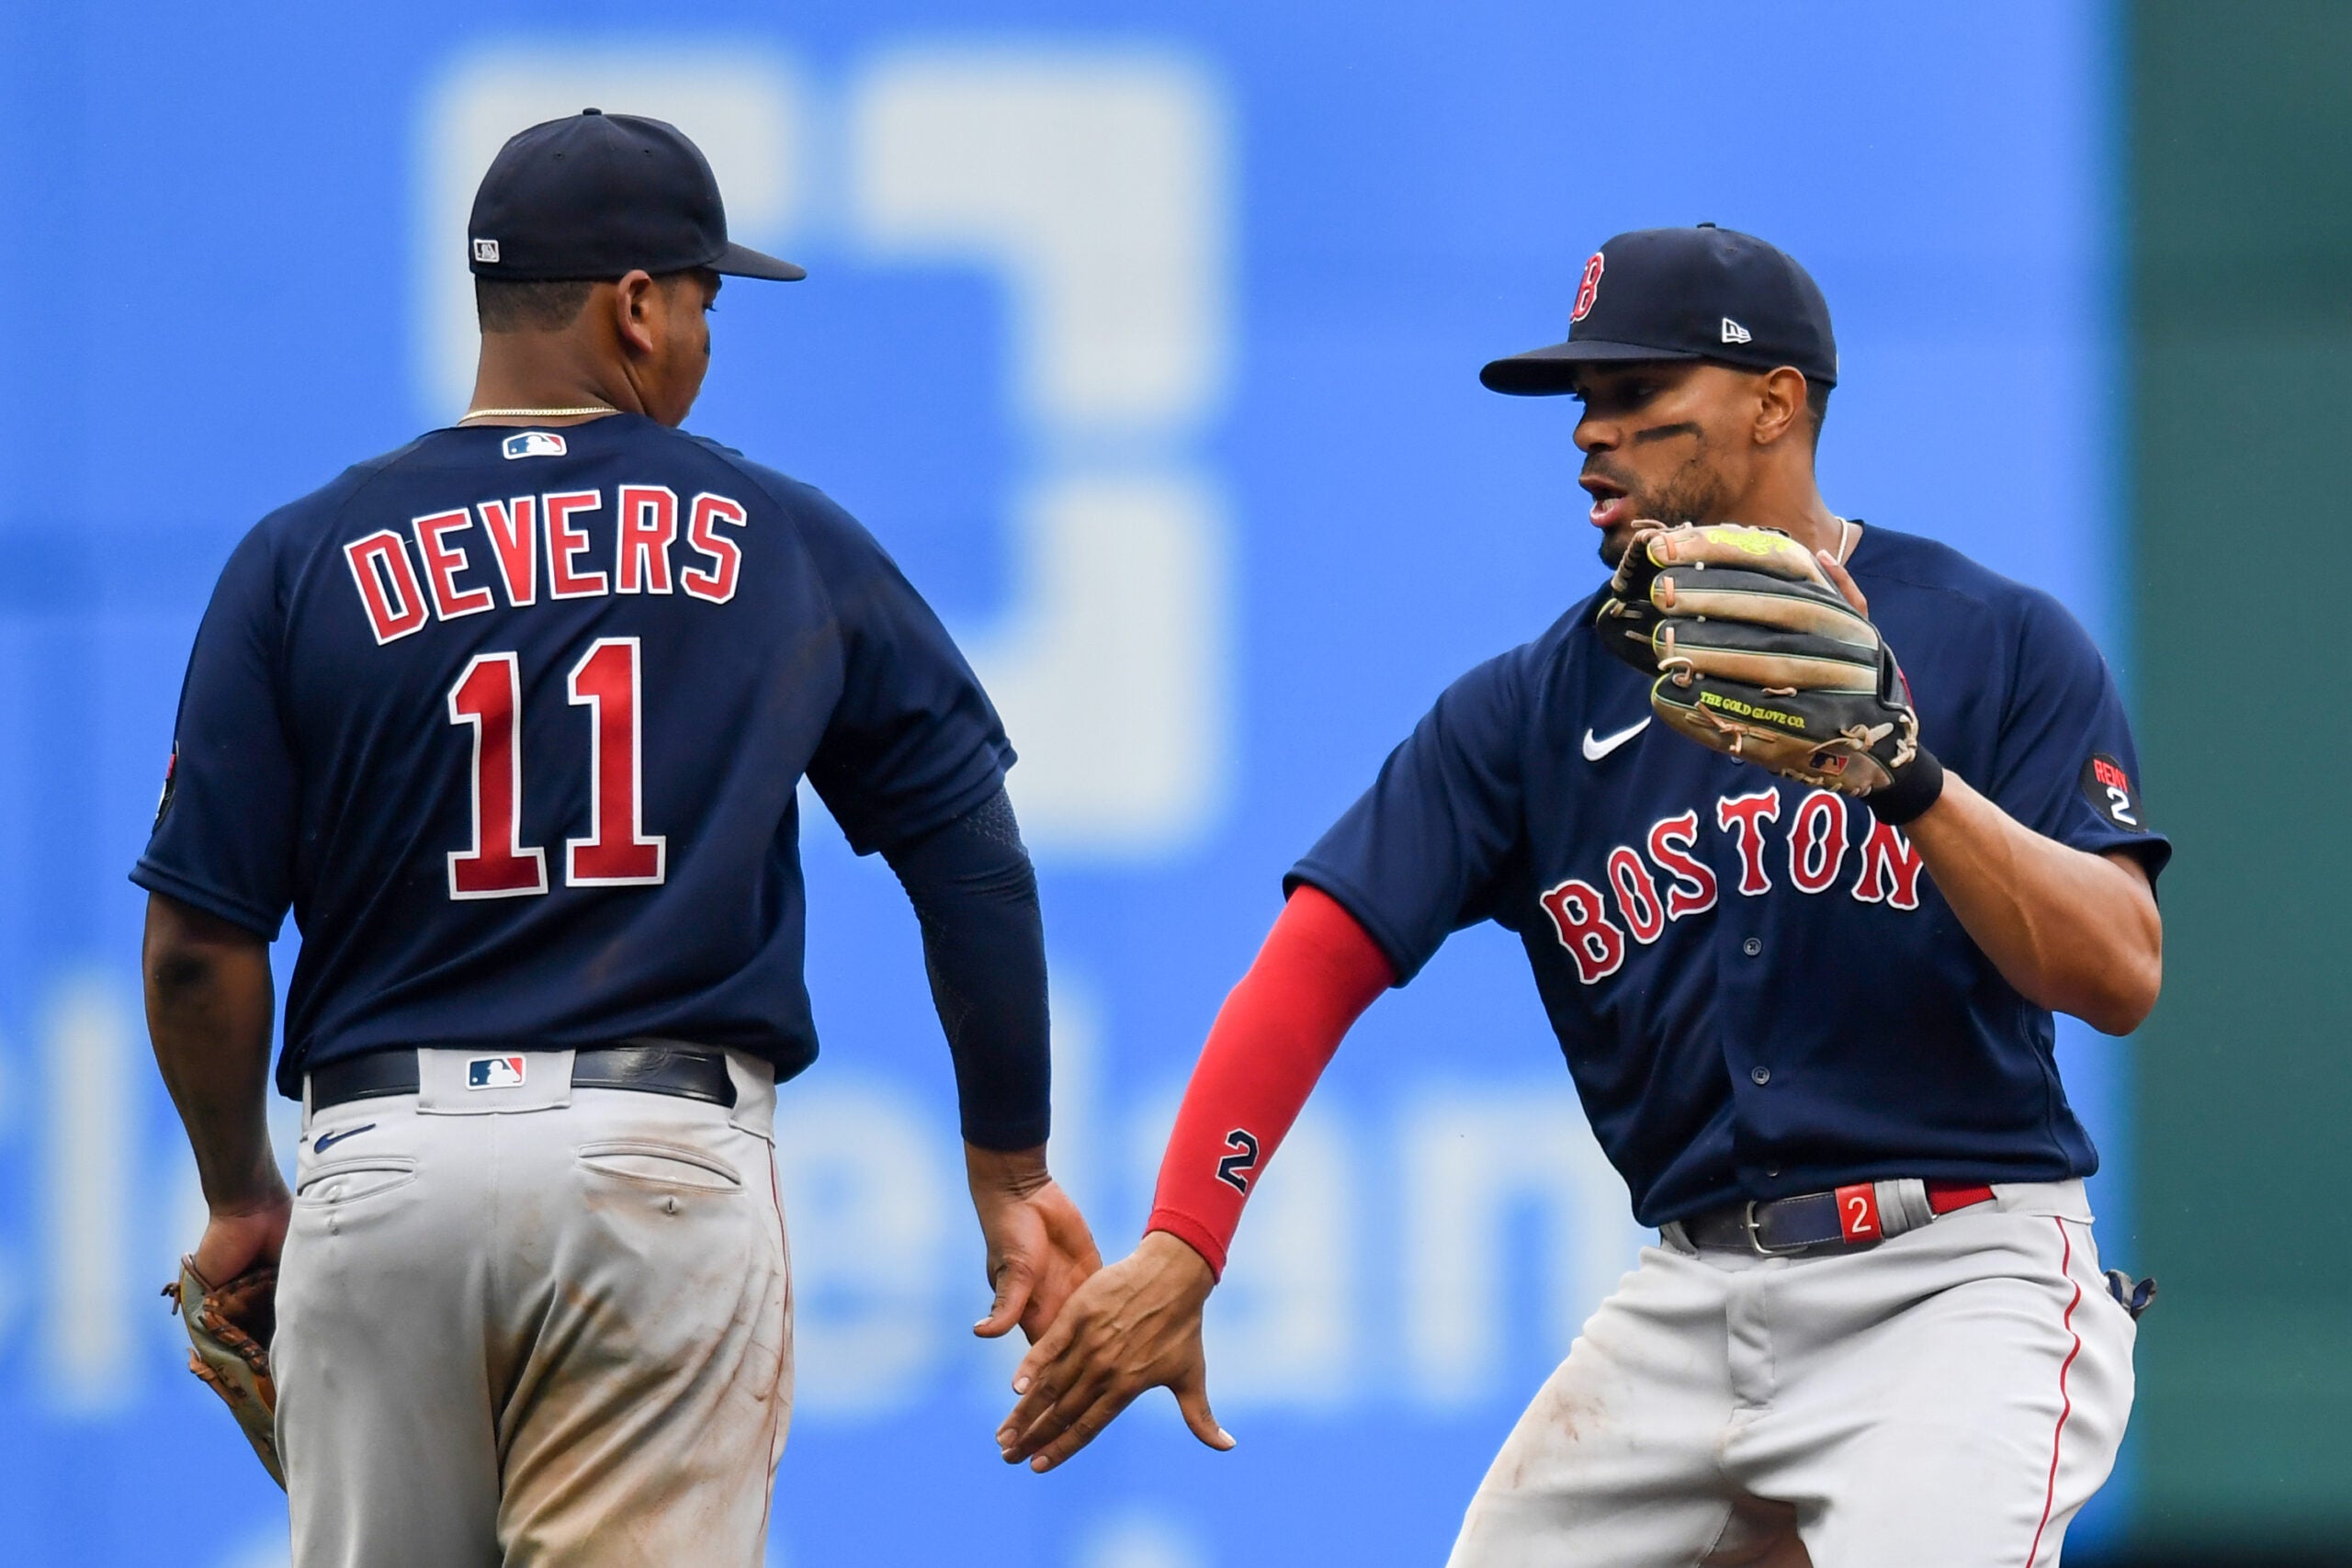 The Red Sox have turned their season around, but there's more to be done